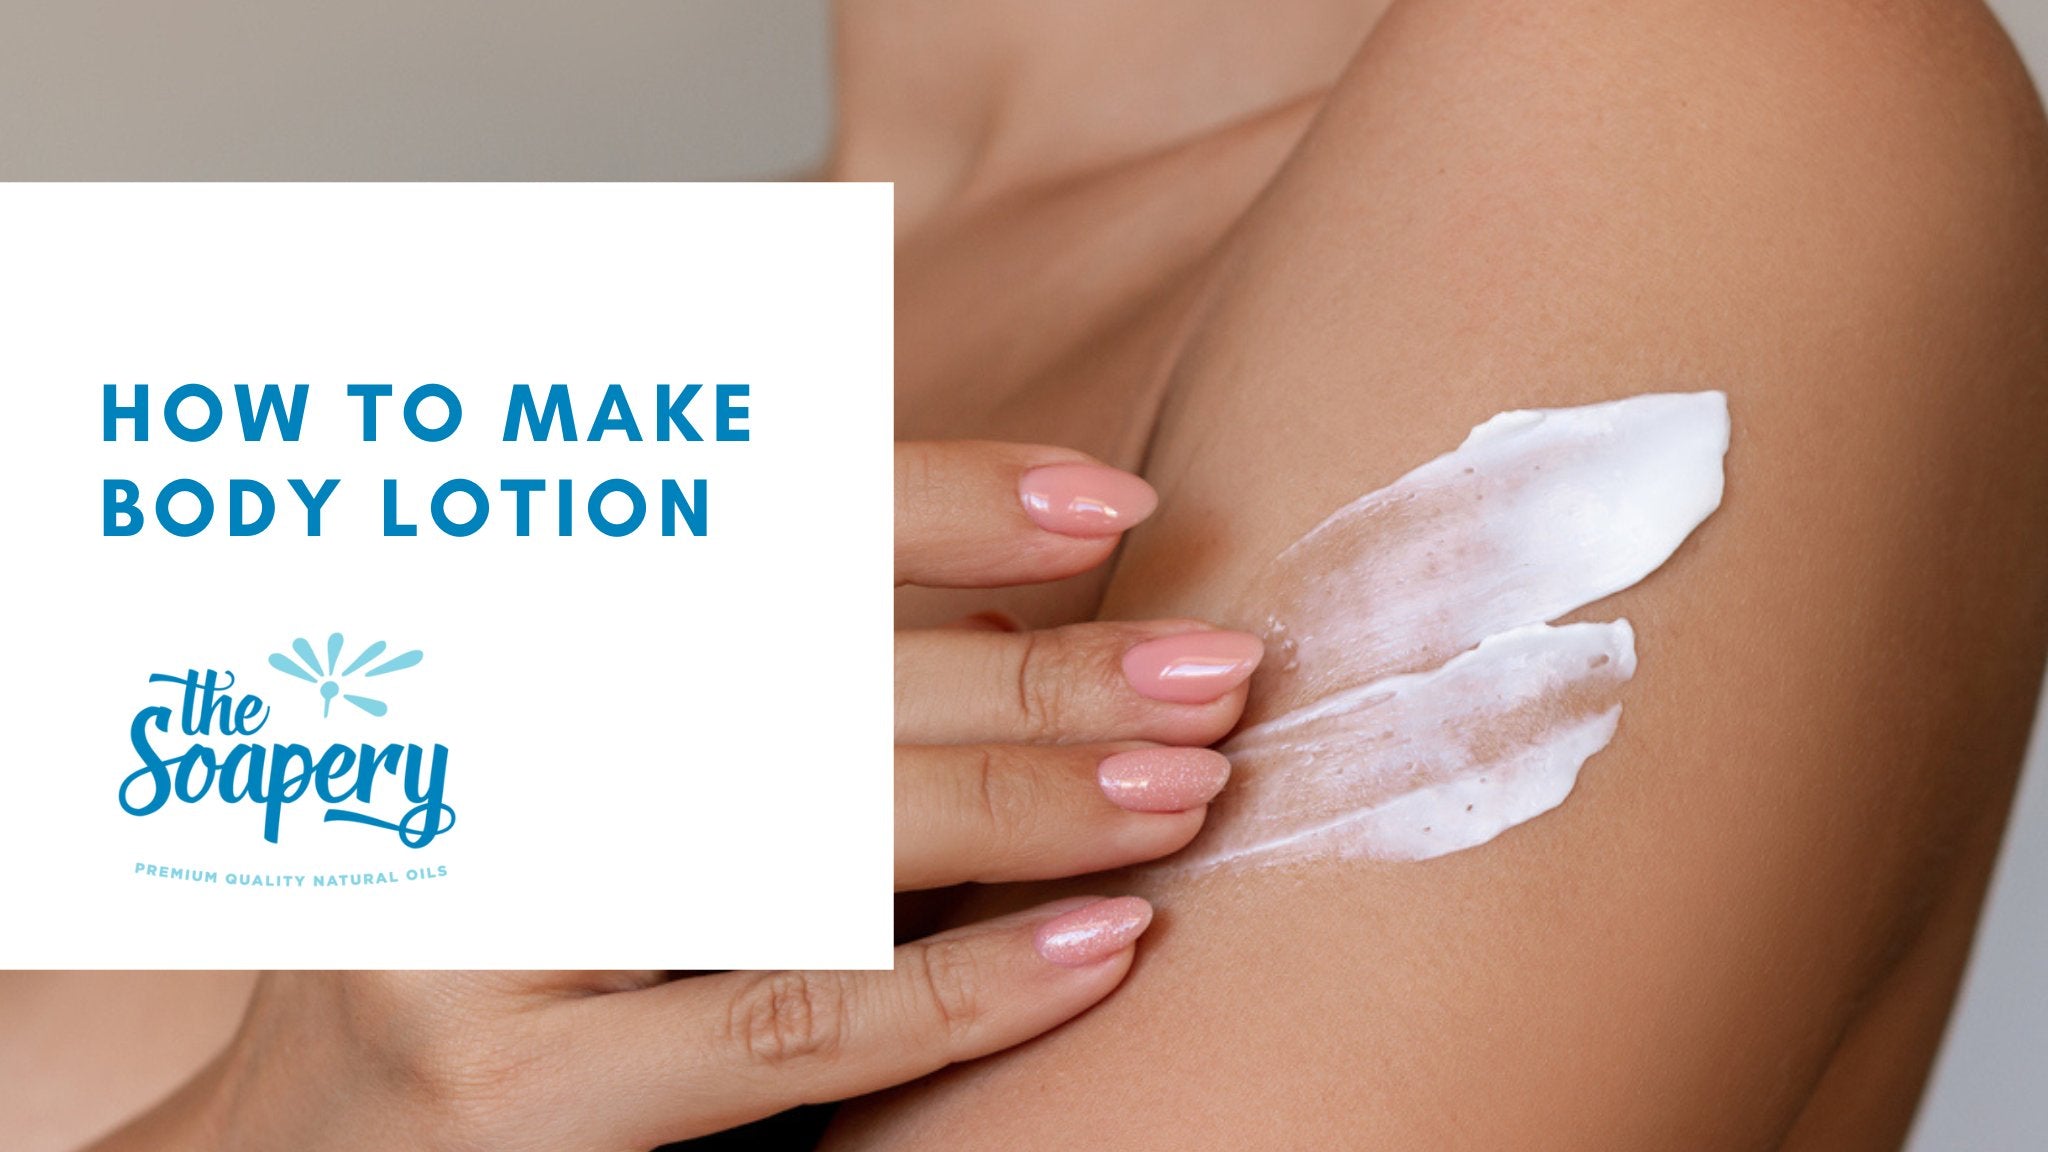 How to Use Quick Lotion Mix - Lotion Making Made Easy!